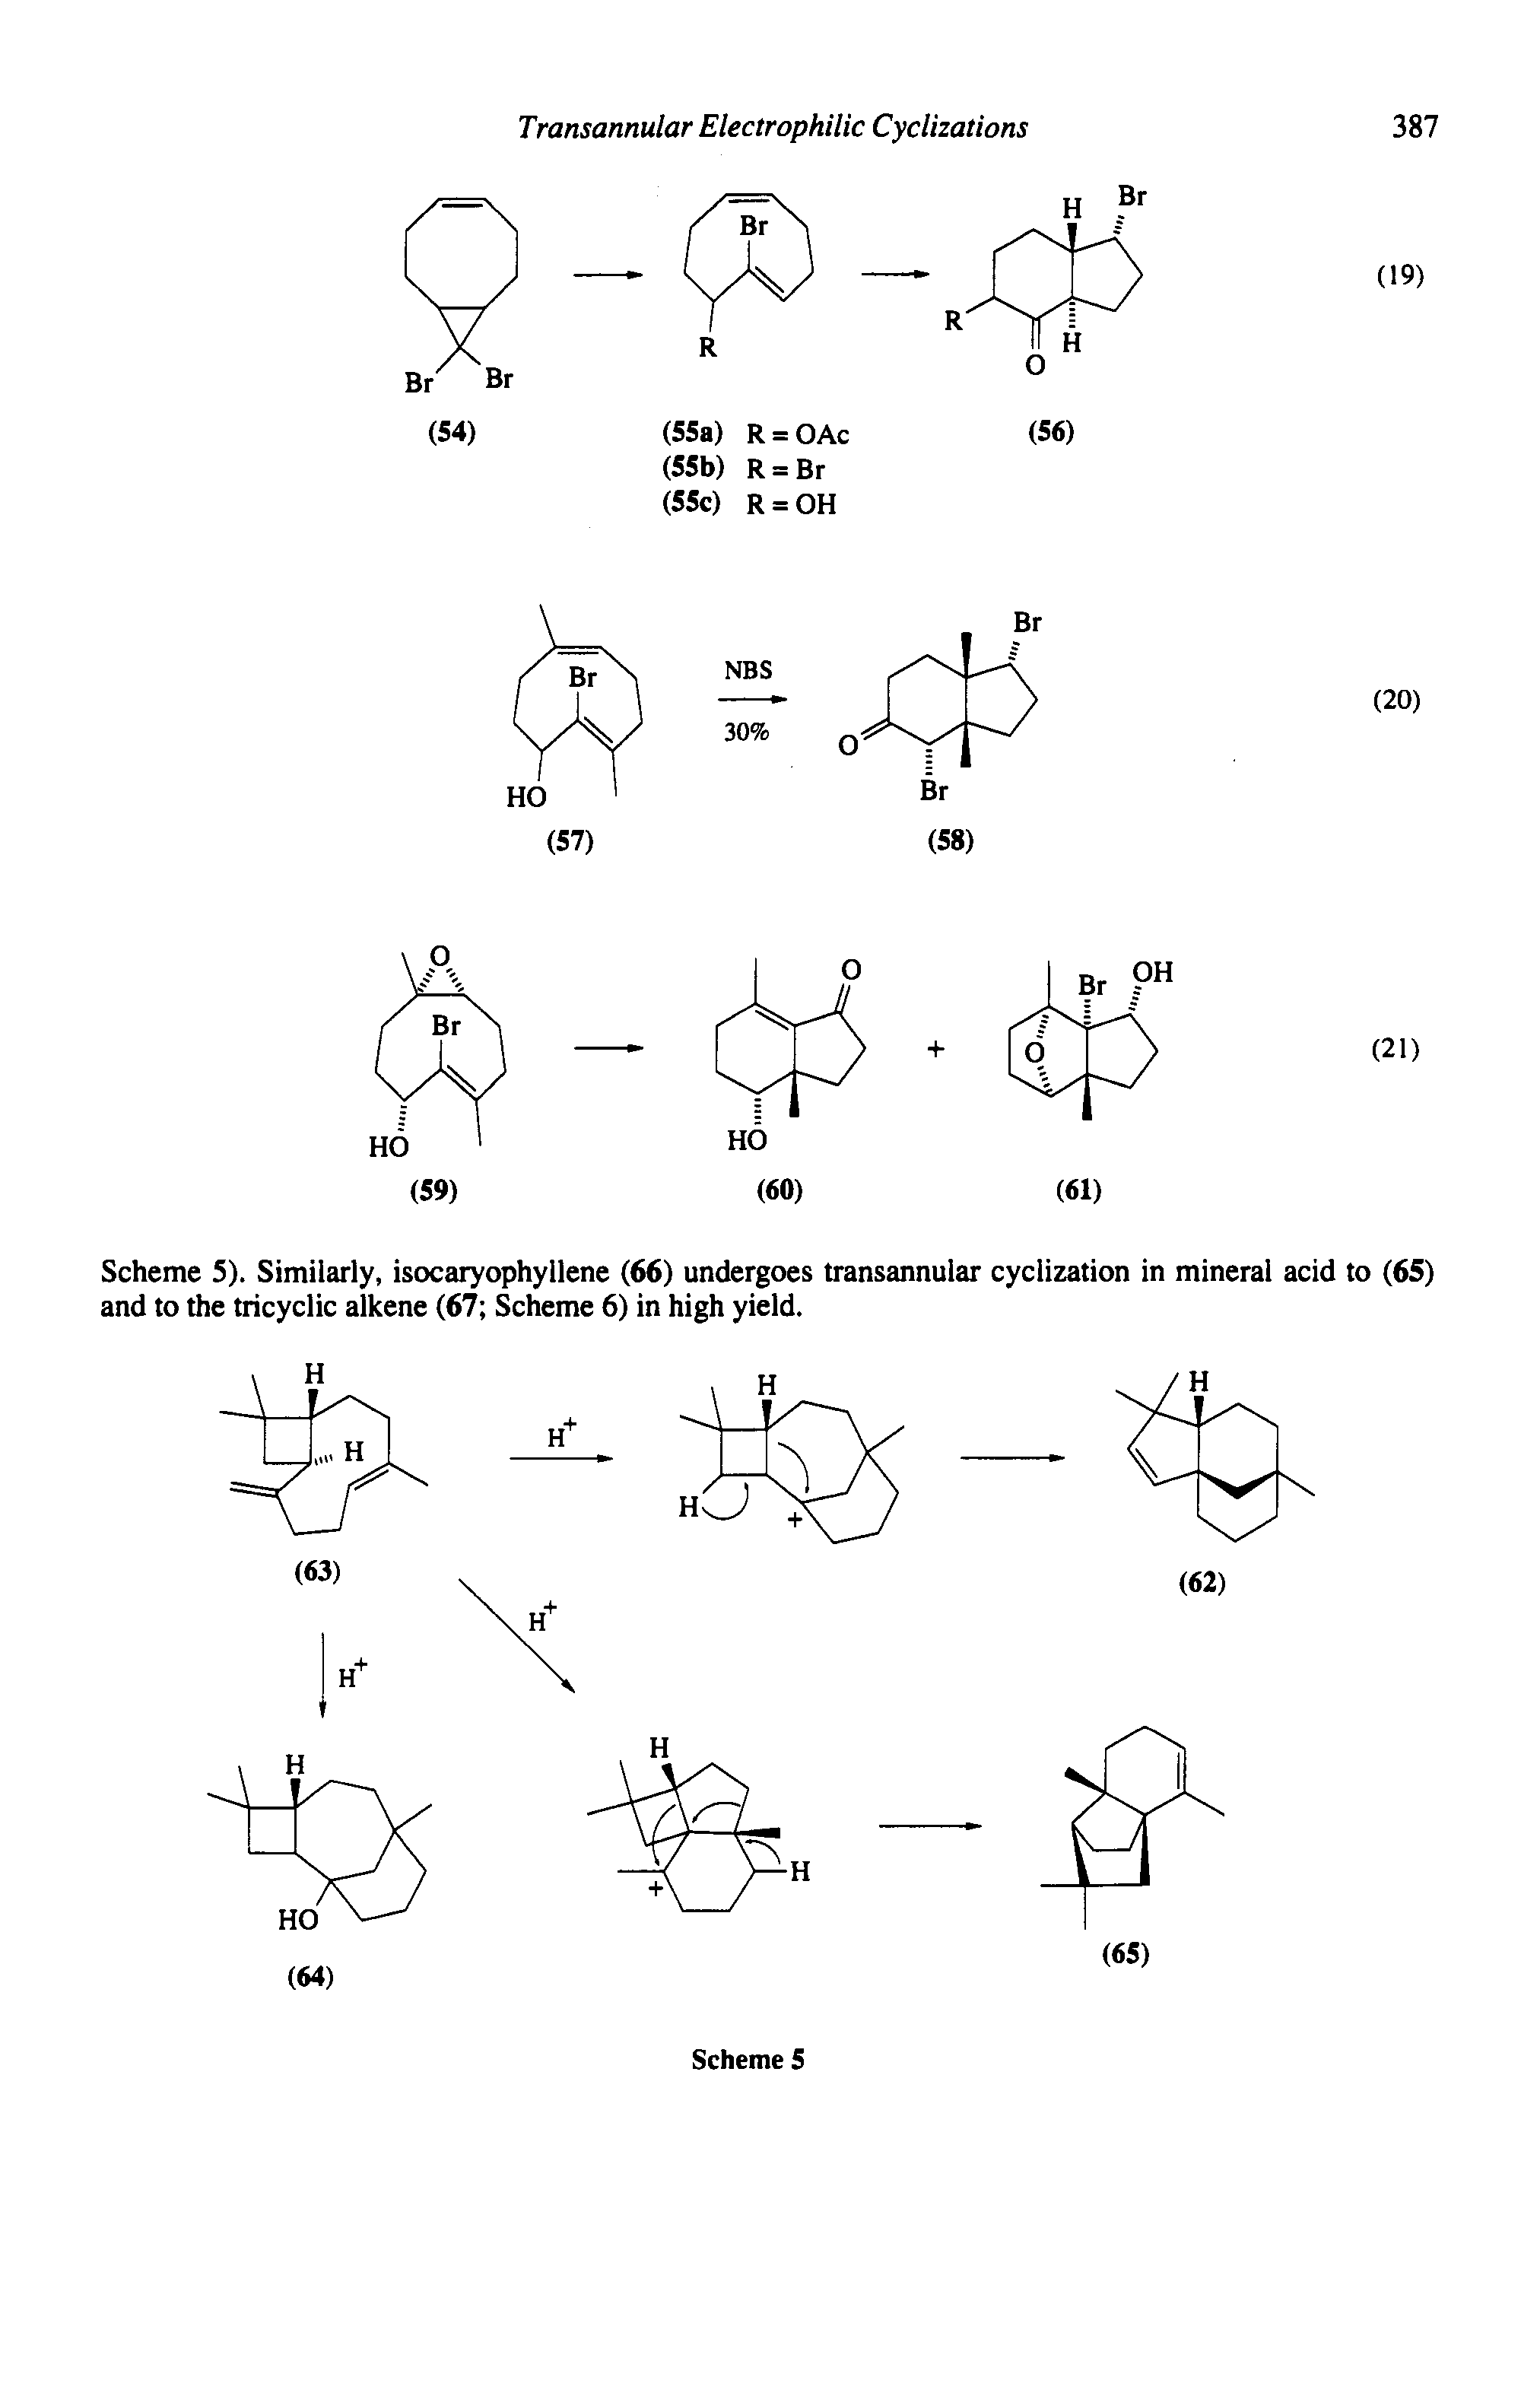 Scheme 5). Similarly, isocaryophyllene (66) undergoes transannular cyclization in mineral acid to (65) and to the tricyclic alkene (67 Scheme 6) in high yield.